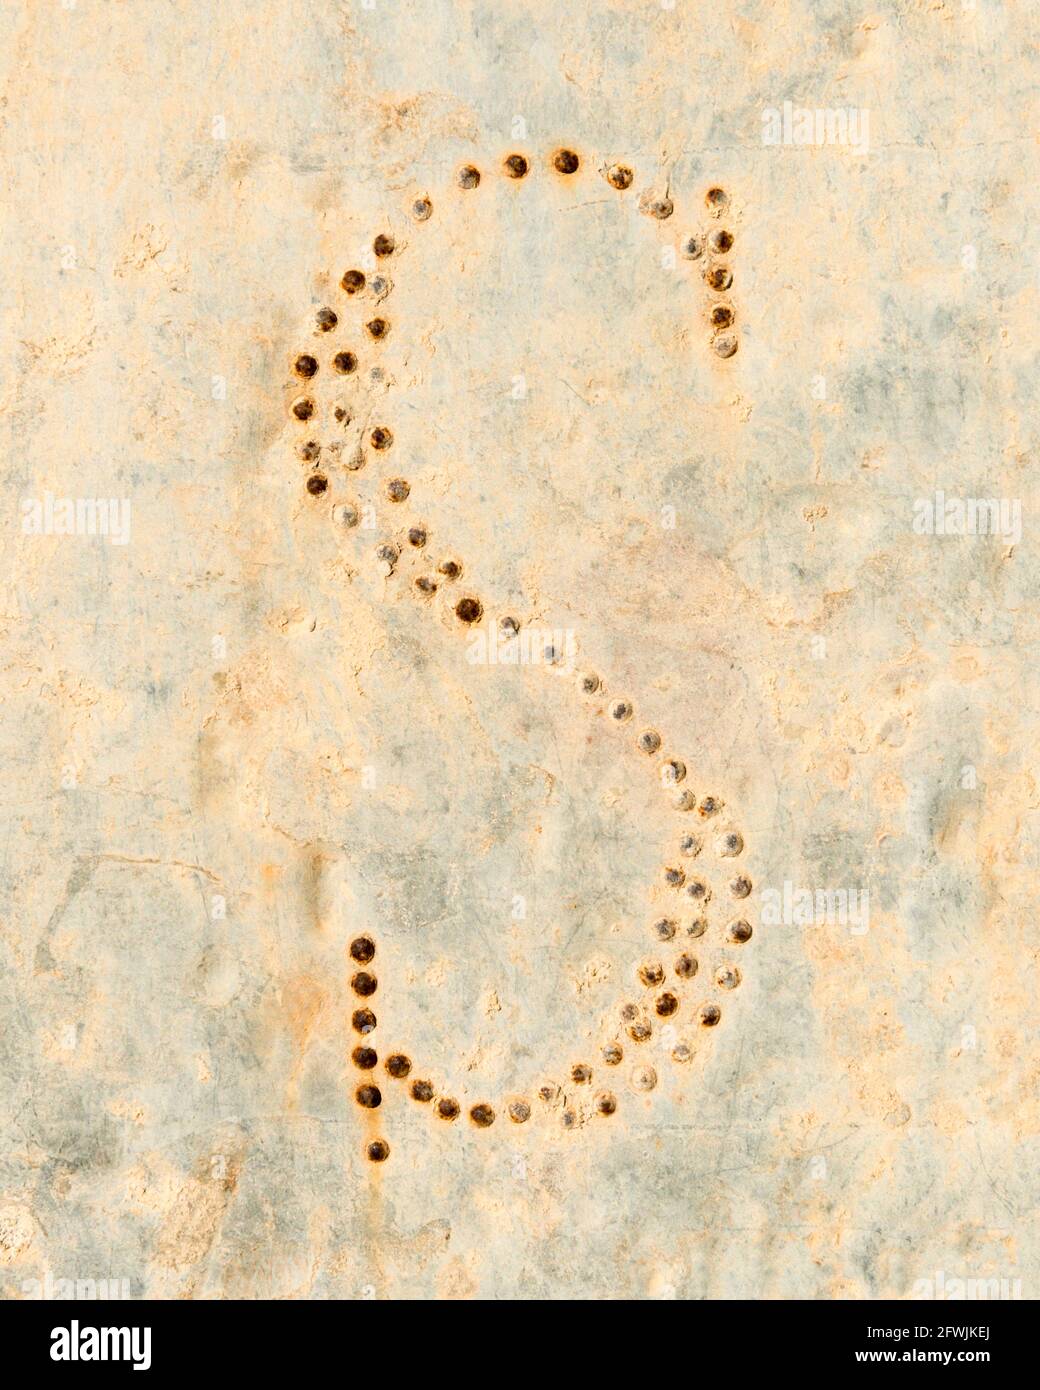 Letter S made up of rusty nails Stock Photo